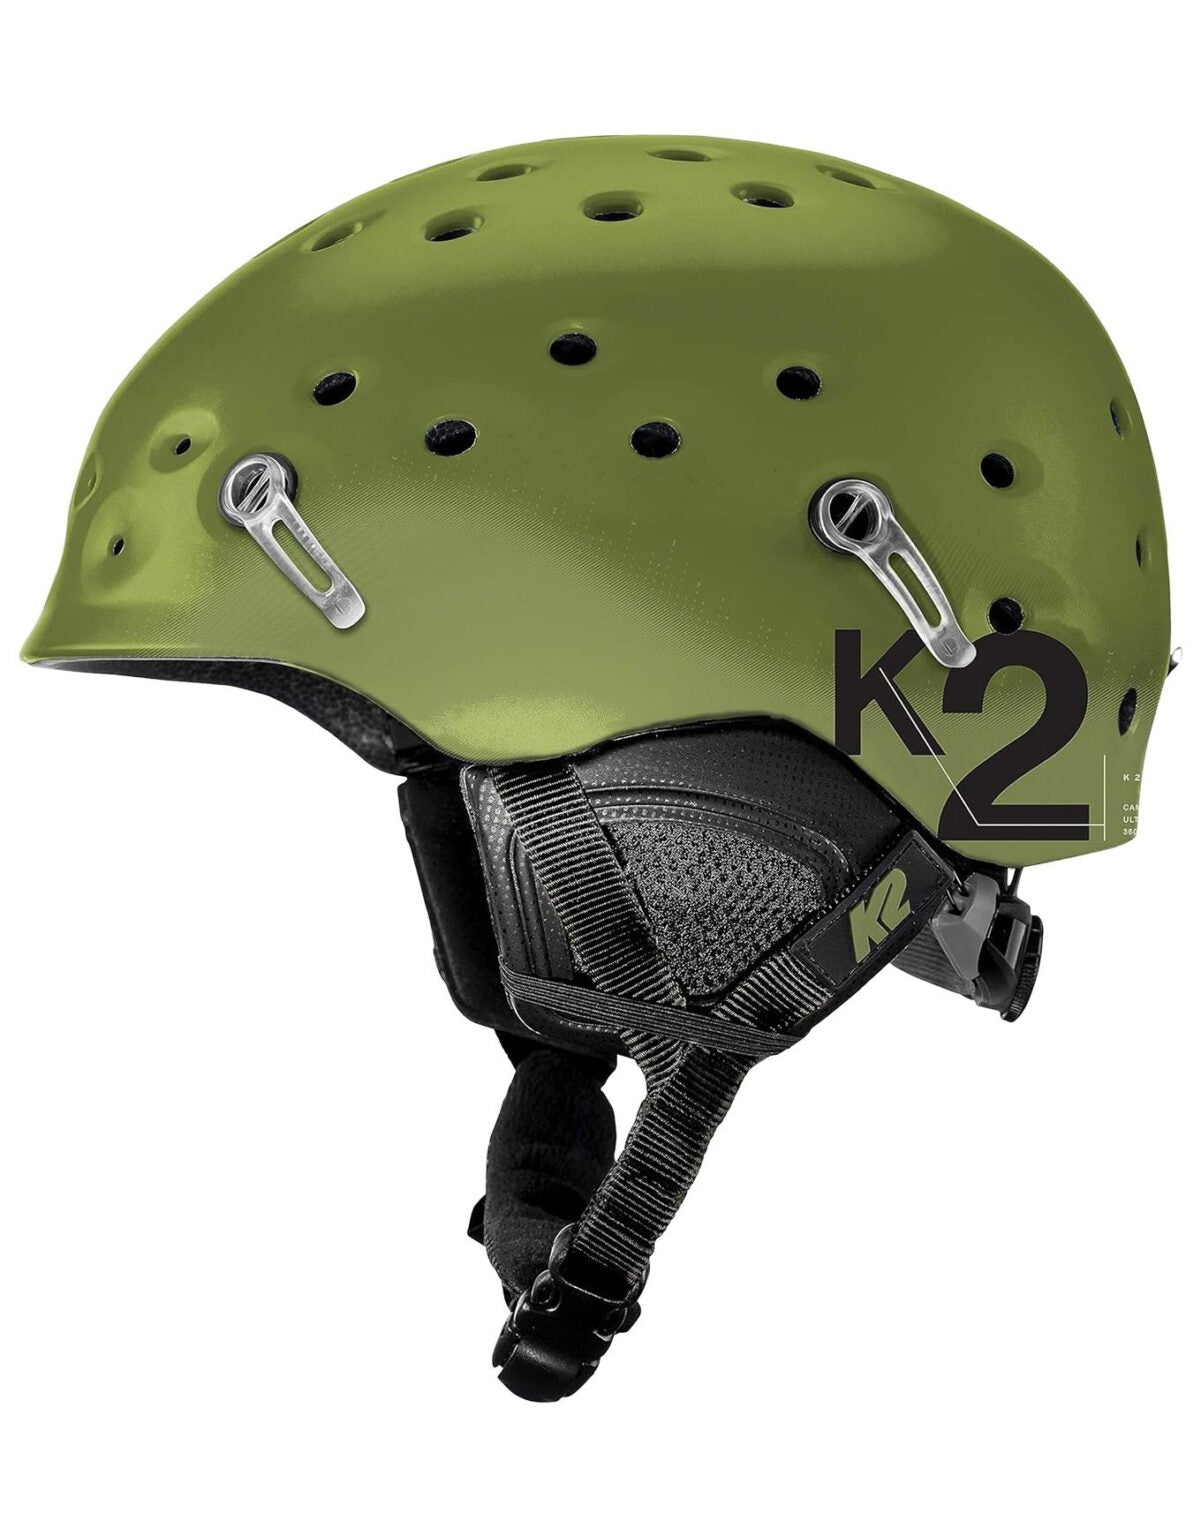 K2 ROUTE military